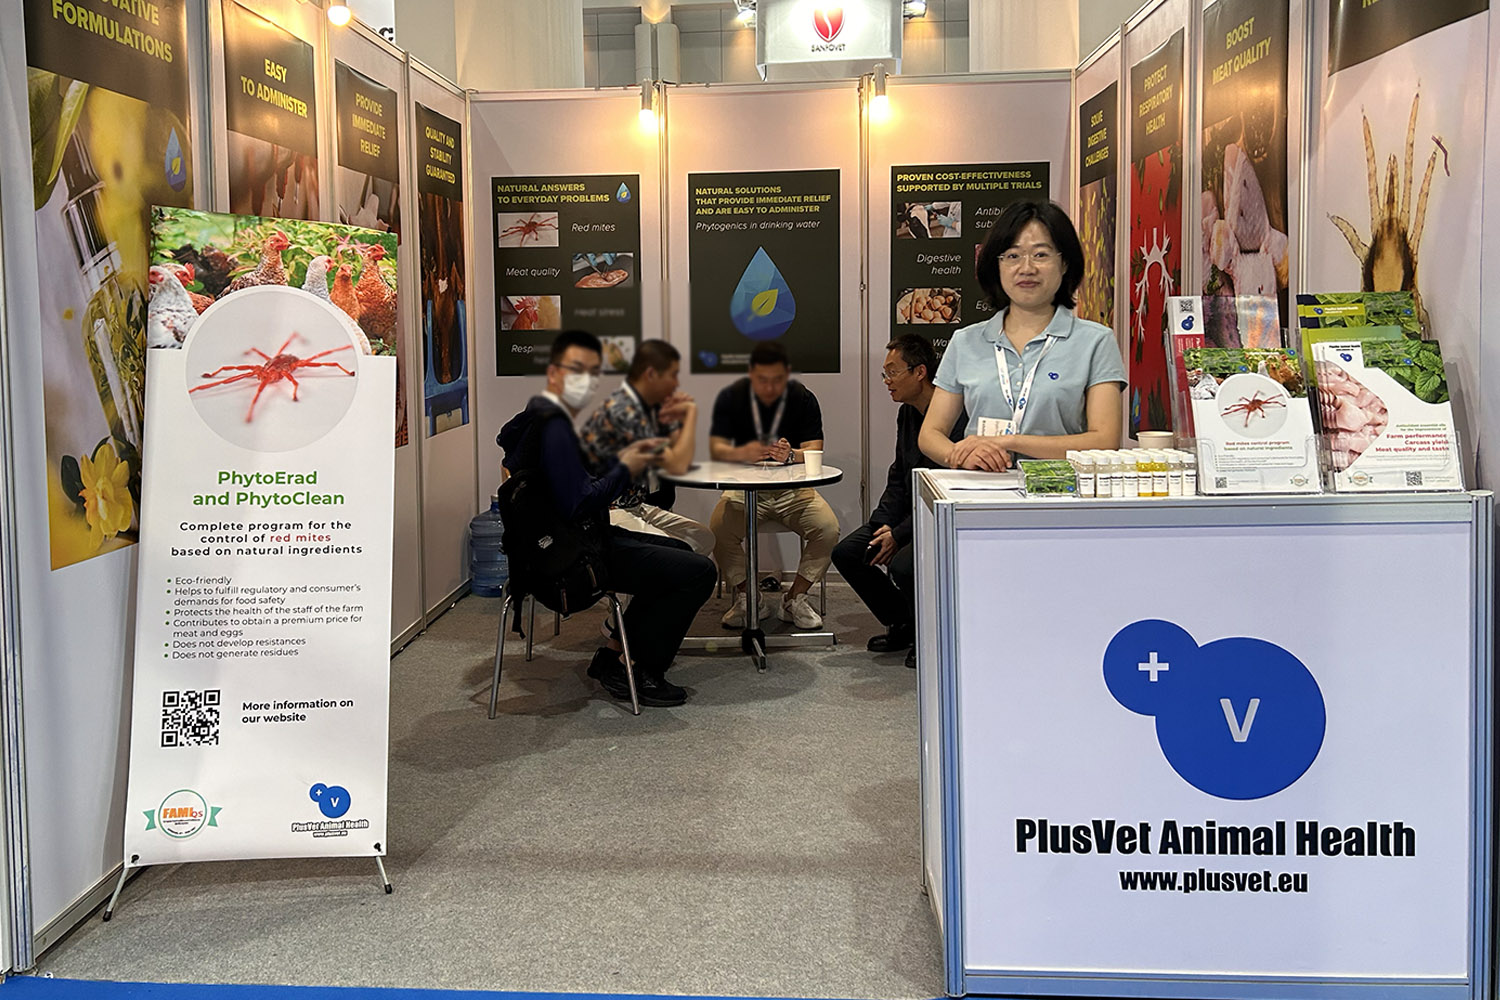 PlusVet Animal Health, feed additives, feed additives, plant extracts, essential oils, phytobiotics, phytochemicals, phytogenics, replace antibiotics growth promoters, natural products, digestive health, poultry, poultry, swine, pigs, ruminants, aquaculture, rabbits